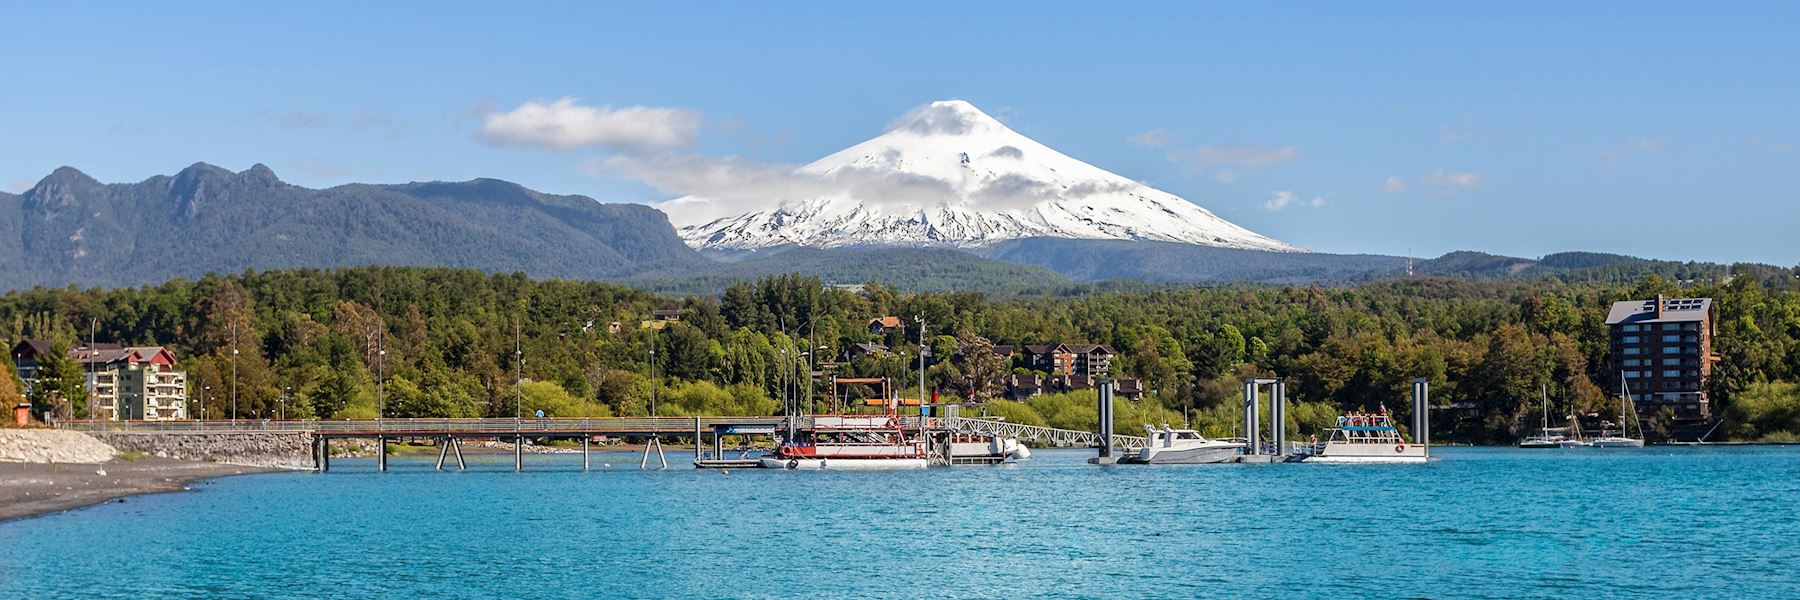 Visit Pucon on a trip to Chile | Audley Travel